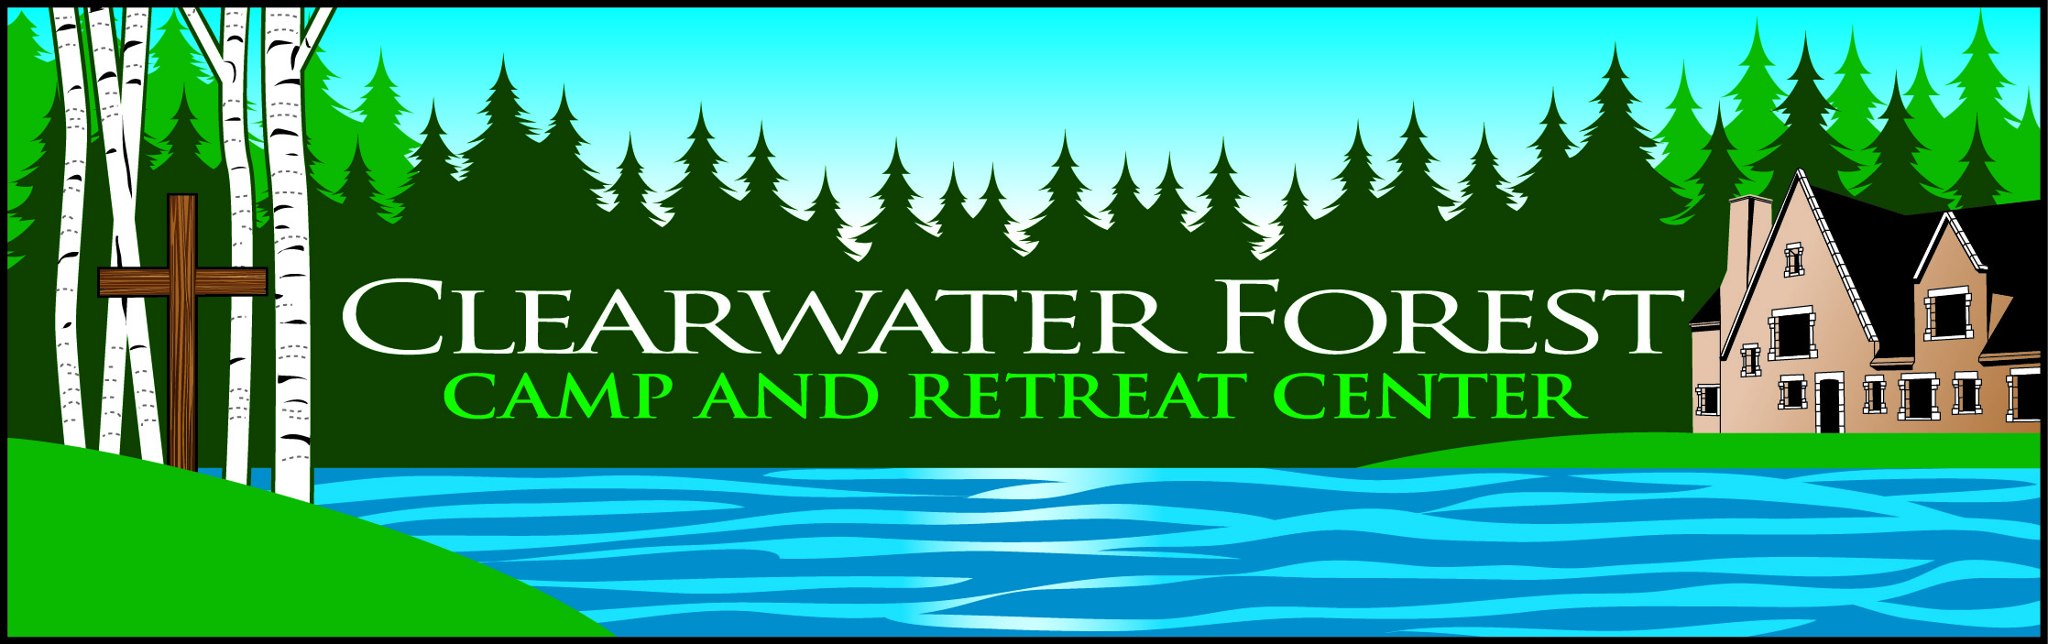 Clearwater Forest Camp and Retreat Center